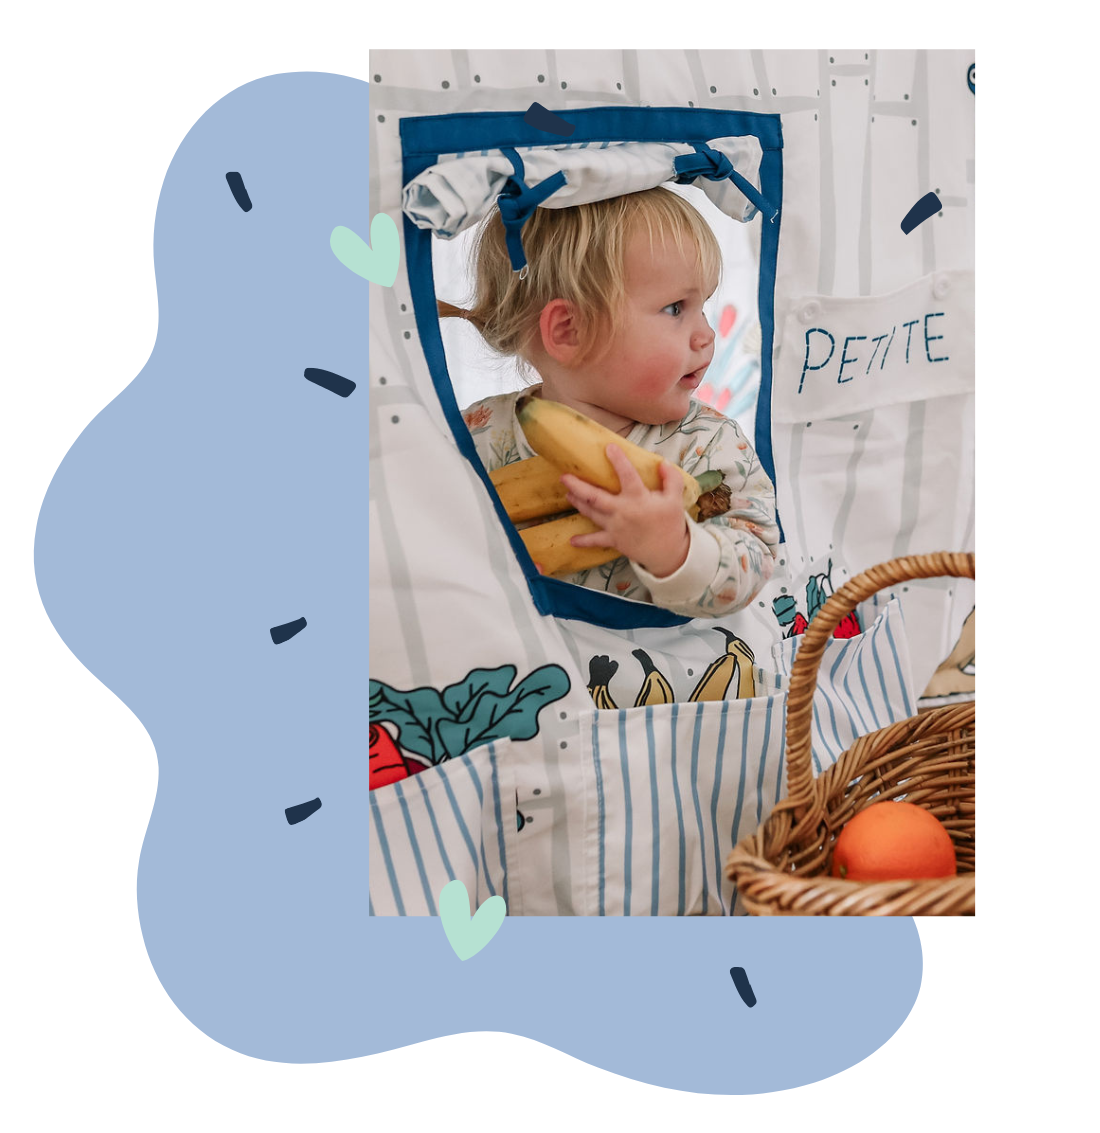 Image of child peeking out of Petite Maison Play Petite Shop Table Tent cubby holding a banana. 